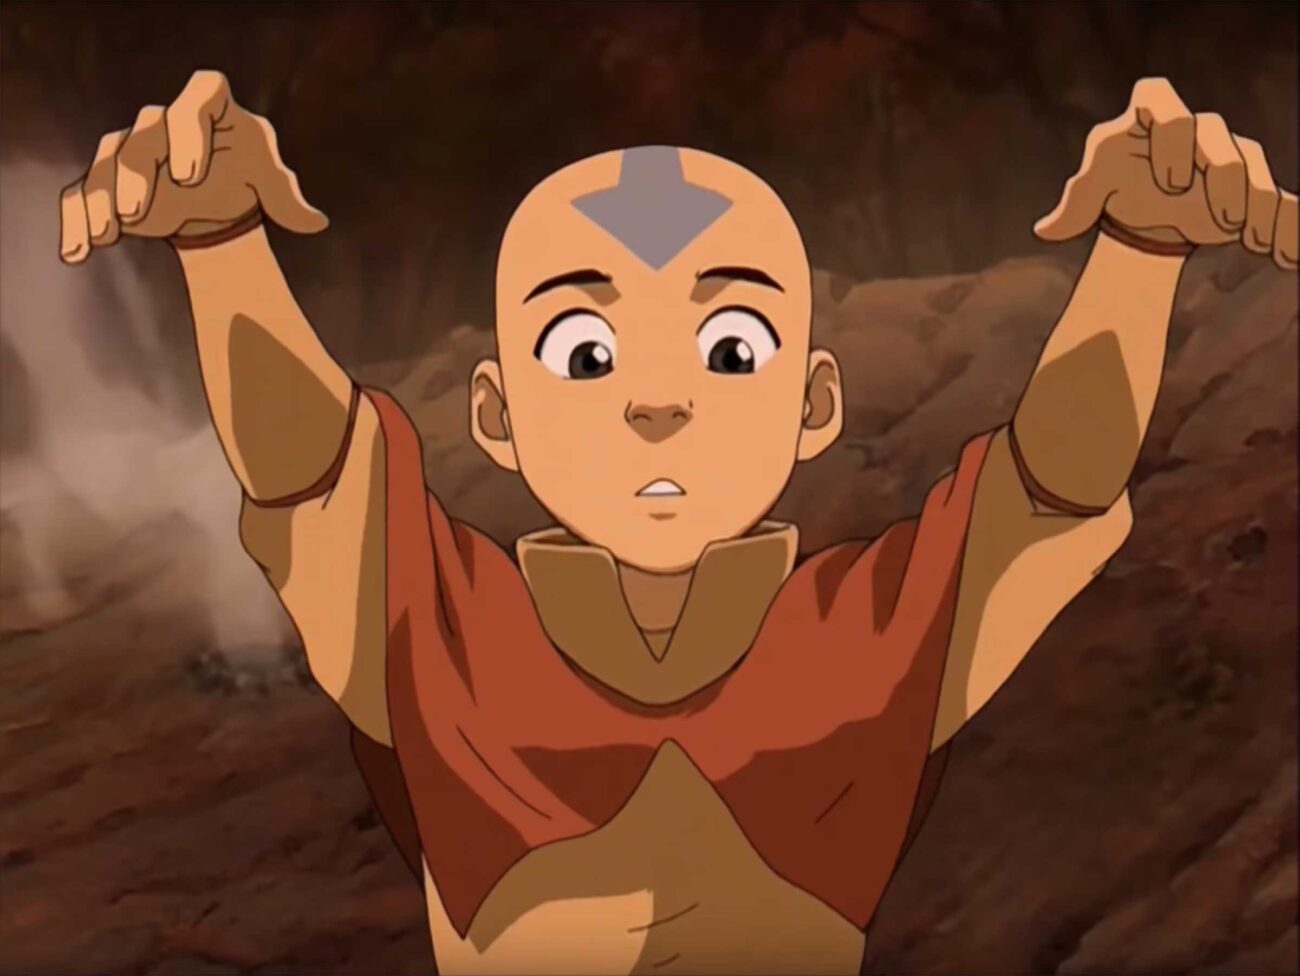 'Avatar: The Last Airbender' on Netflix: Relive the greatest moments